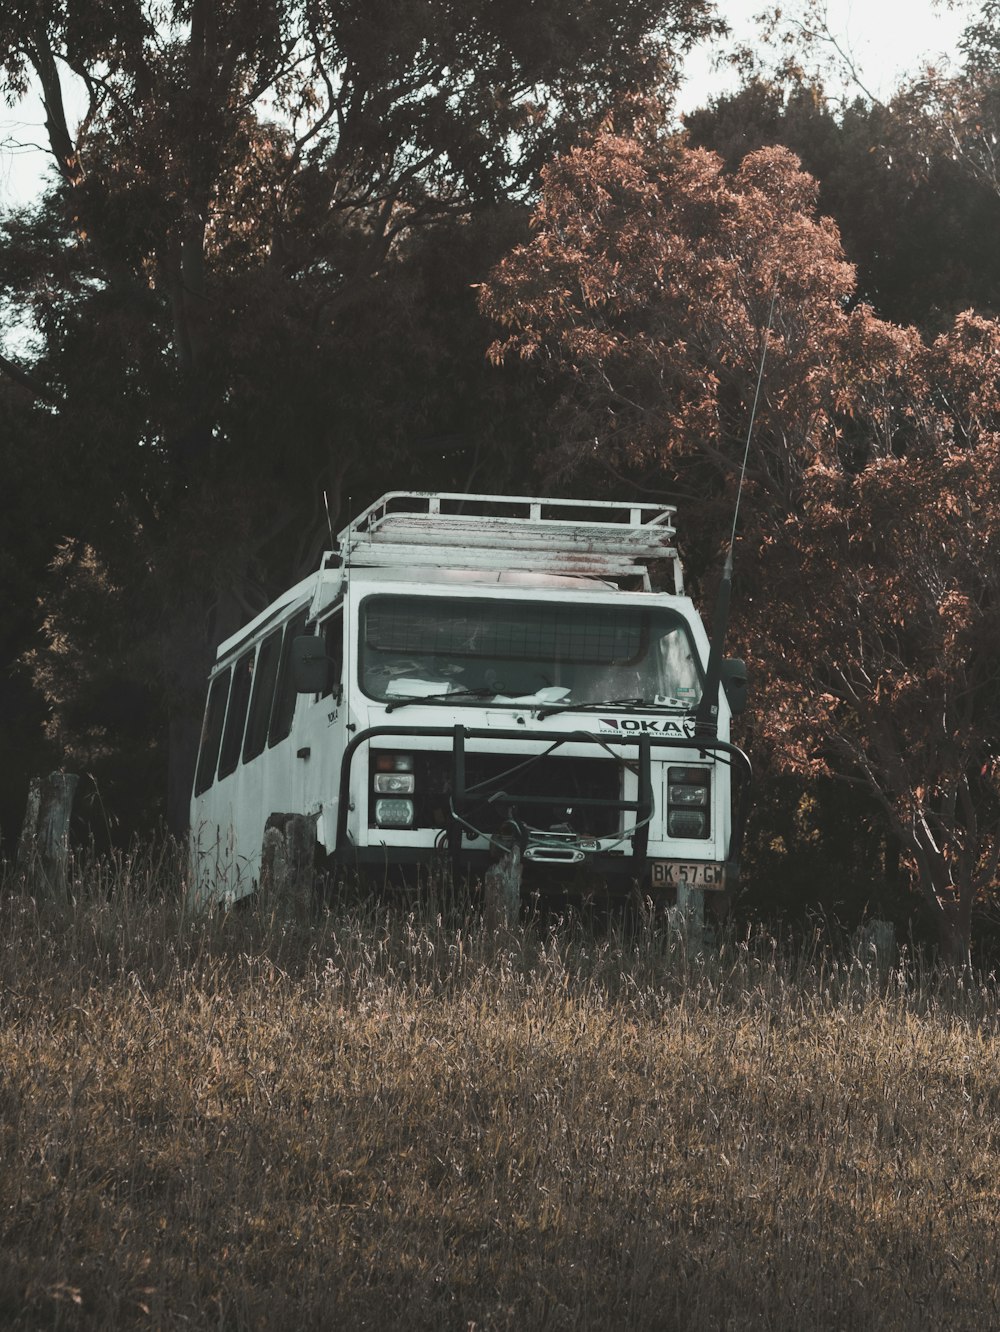 an old bus sitting in a field with trees in the background